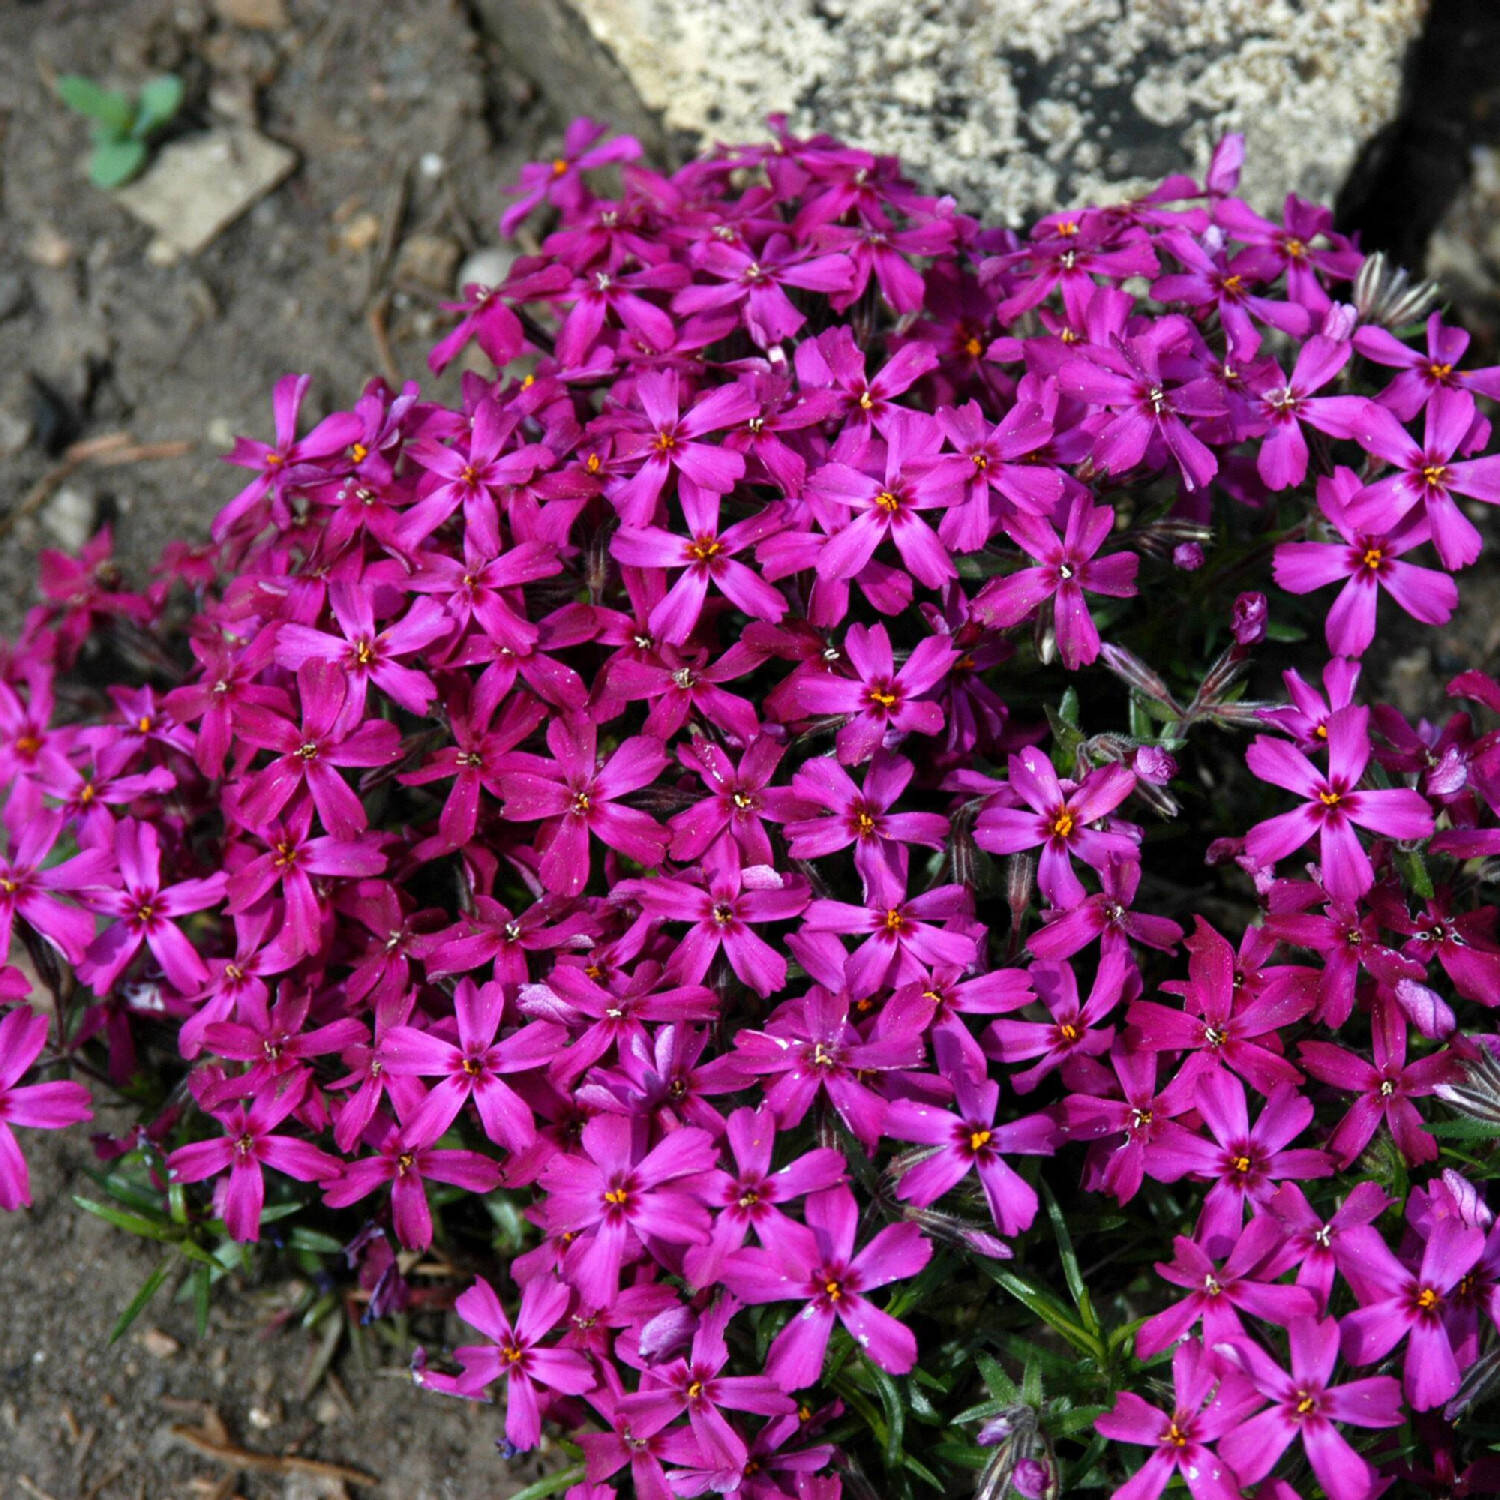  Teppich-Flammenblume 'Temiscaming' - Phlox subulata 'Temiscaming'